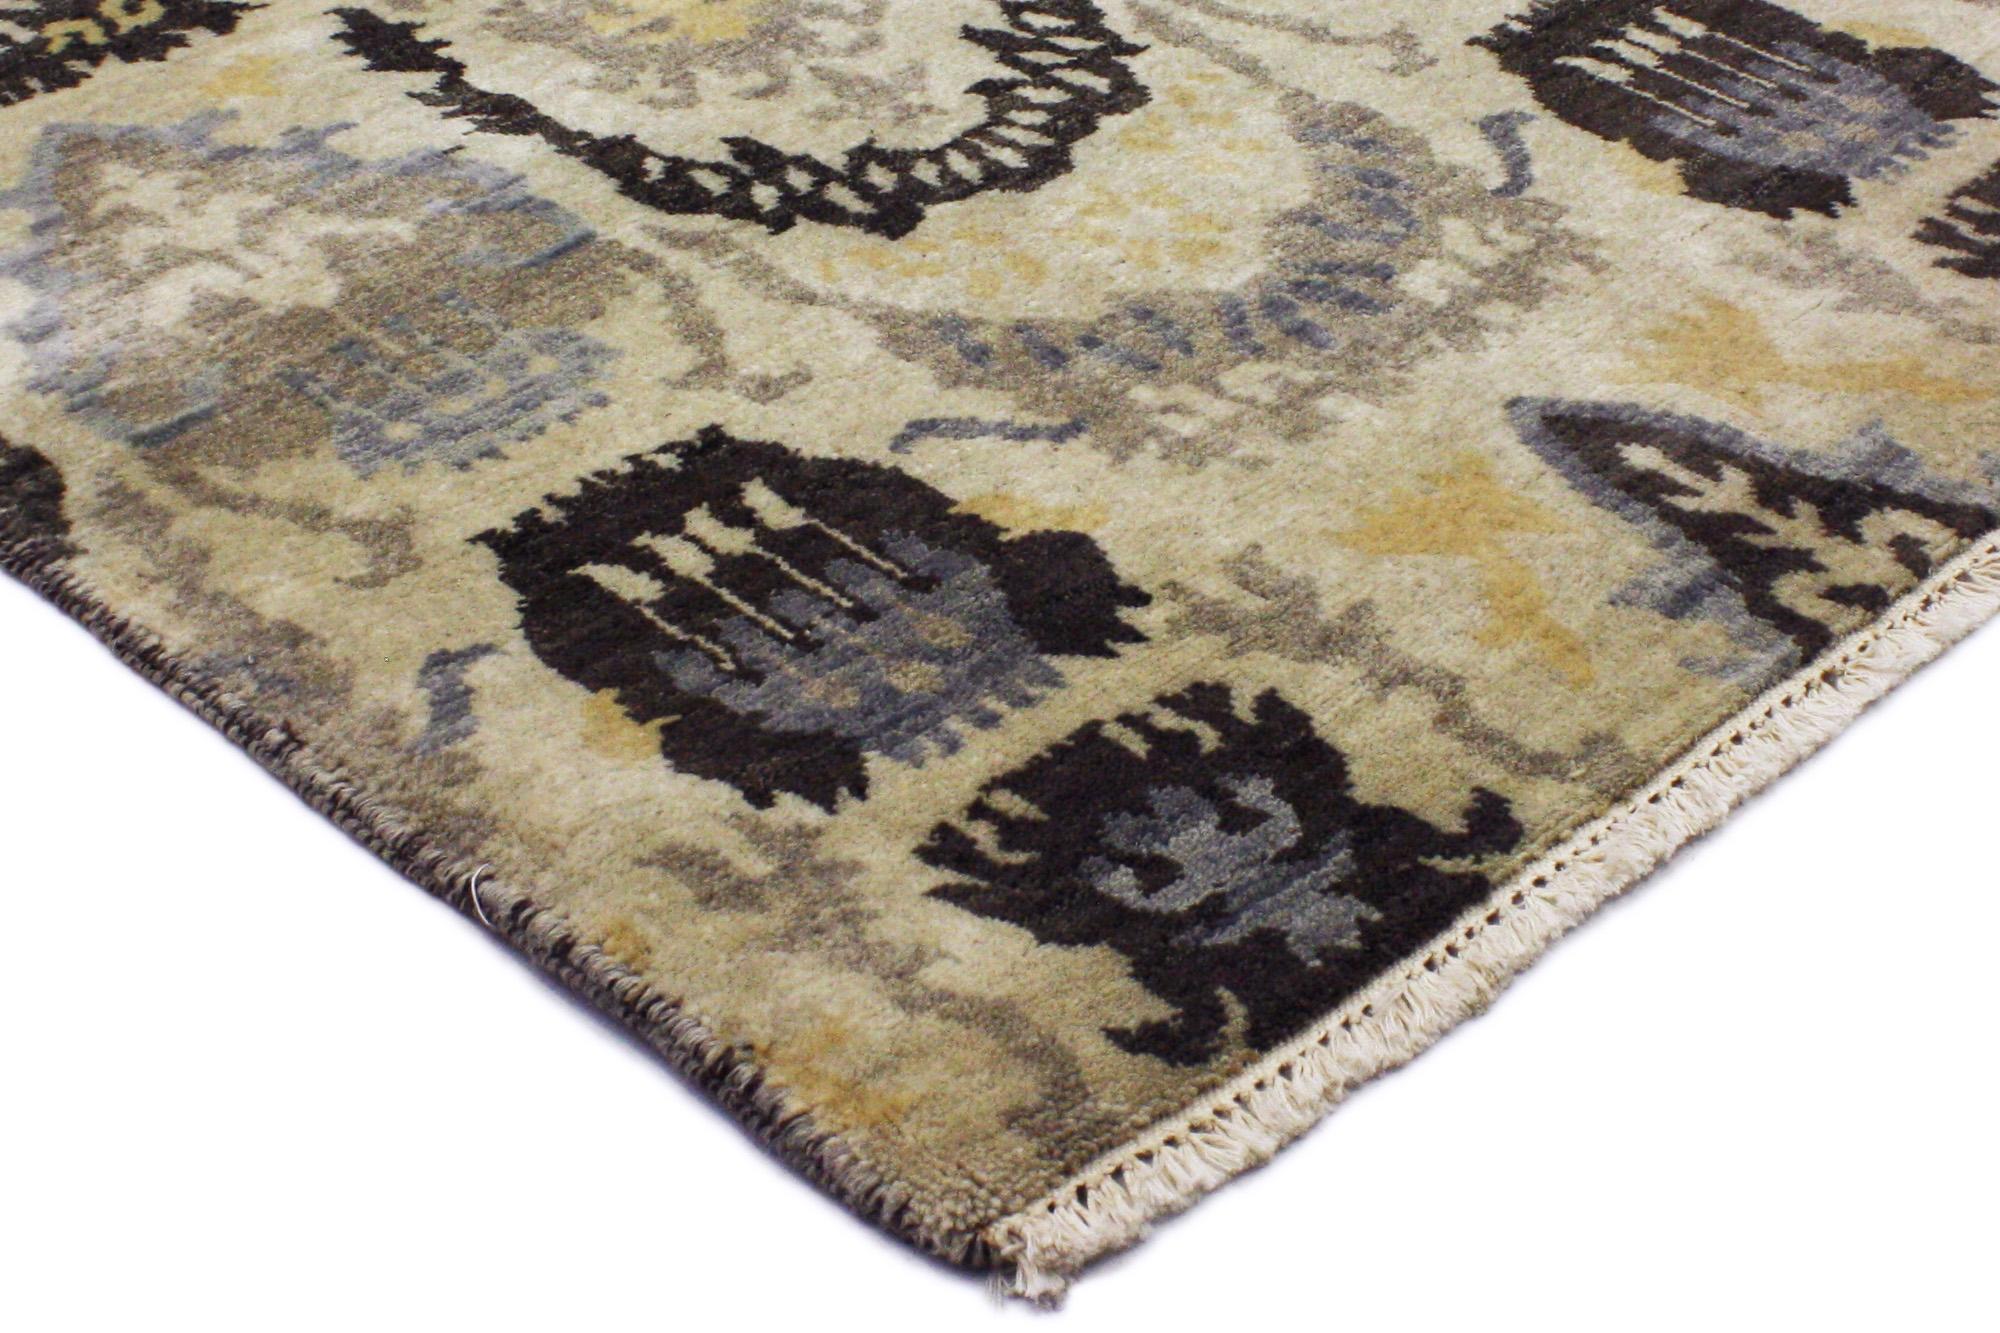 30292 New Modern Transitional Ikat Style Area Rug, 07'11 x 09'09. The warm ecru and beige colors and cool slate blue hues combined with this eye-catching Ikat pattern will make a major statement without visually overwhelming the room. The